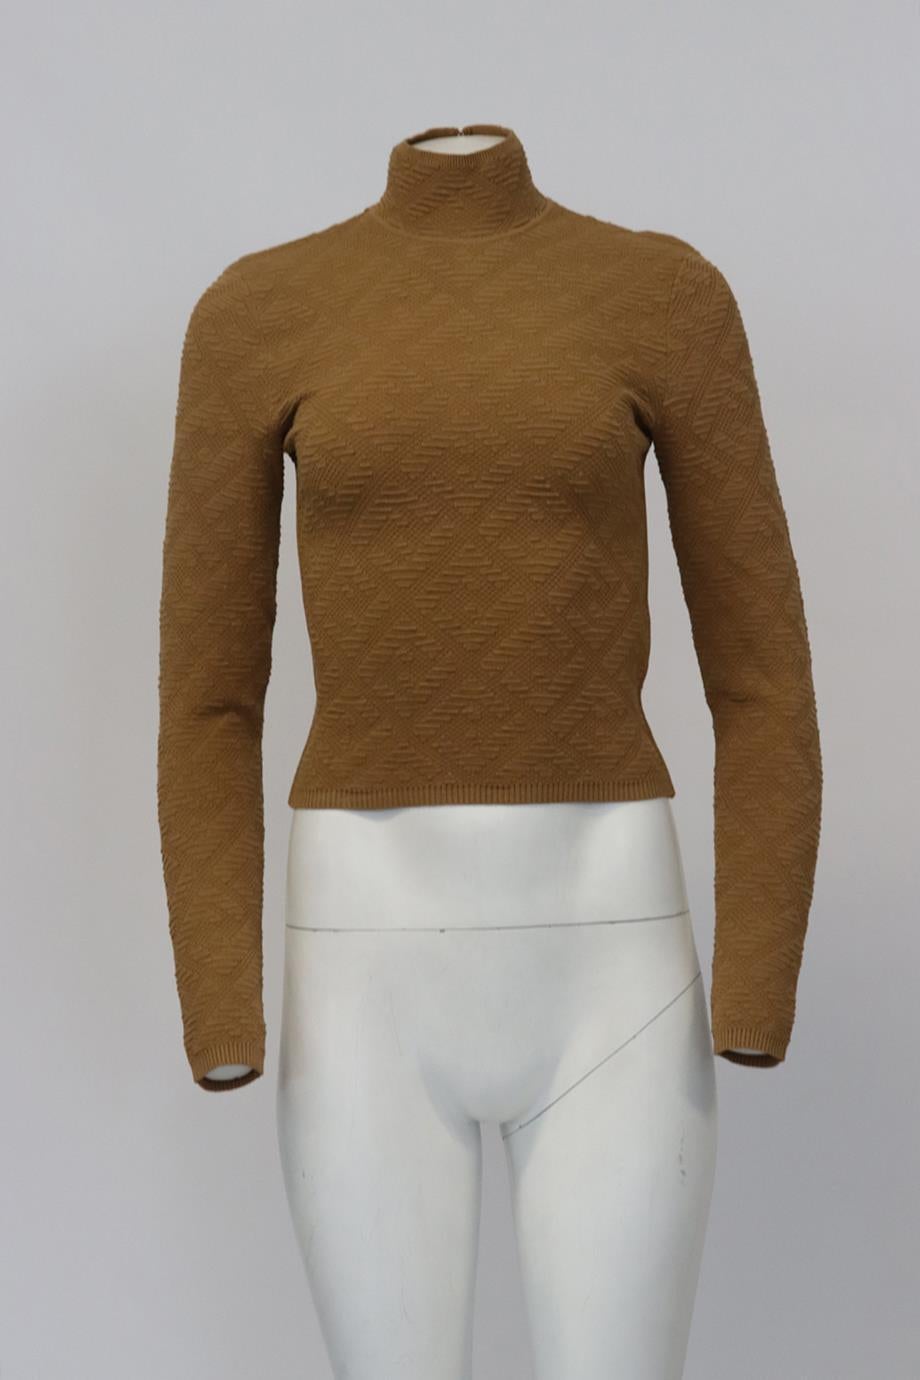 Fendi Ff Jacquard Stretch Knit Turtleneck Sweater. Tan. Long Sleeve. Turtleneck. Slips on. 67% Viscose, 33 polyester. IT 38 (UK 6, US 2, FR 34). Bust: 29.1 in. Waist: 27 in. Hips: 24.5 in. Length: 21.4 in. Condition: New with tags.